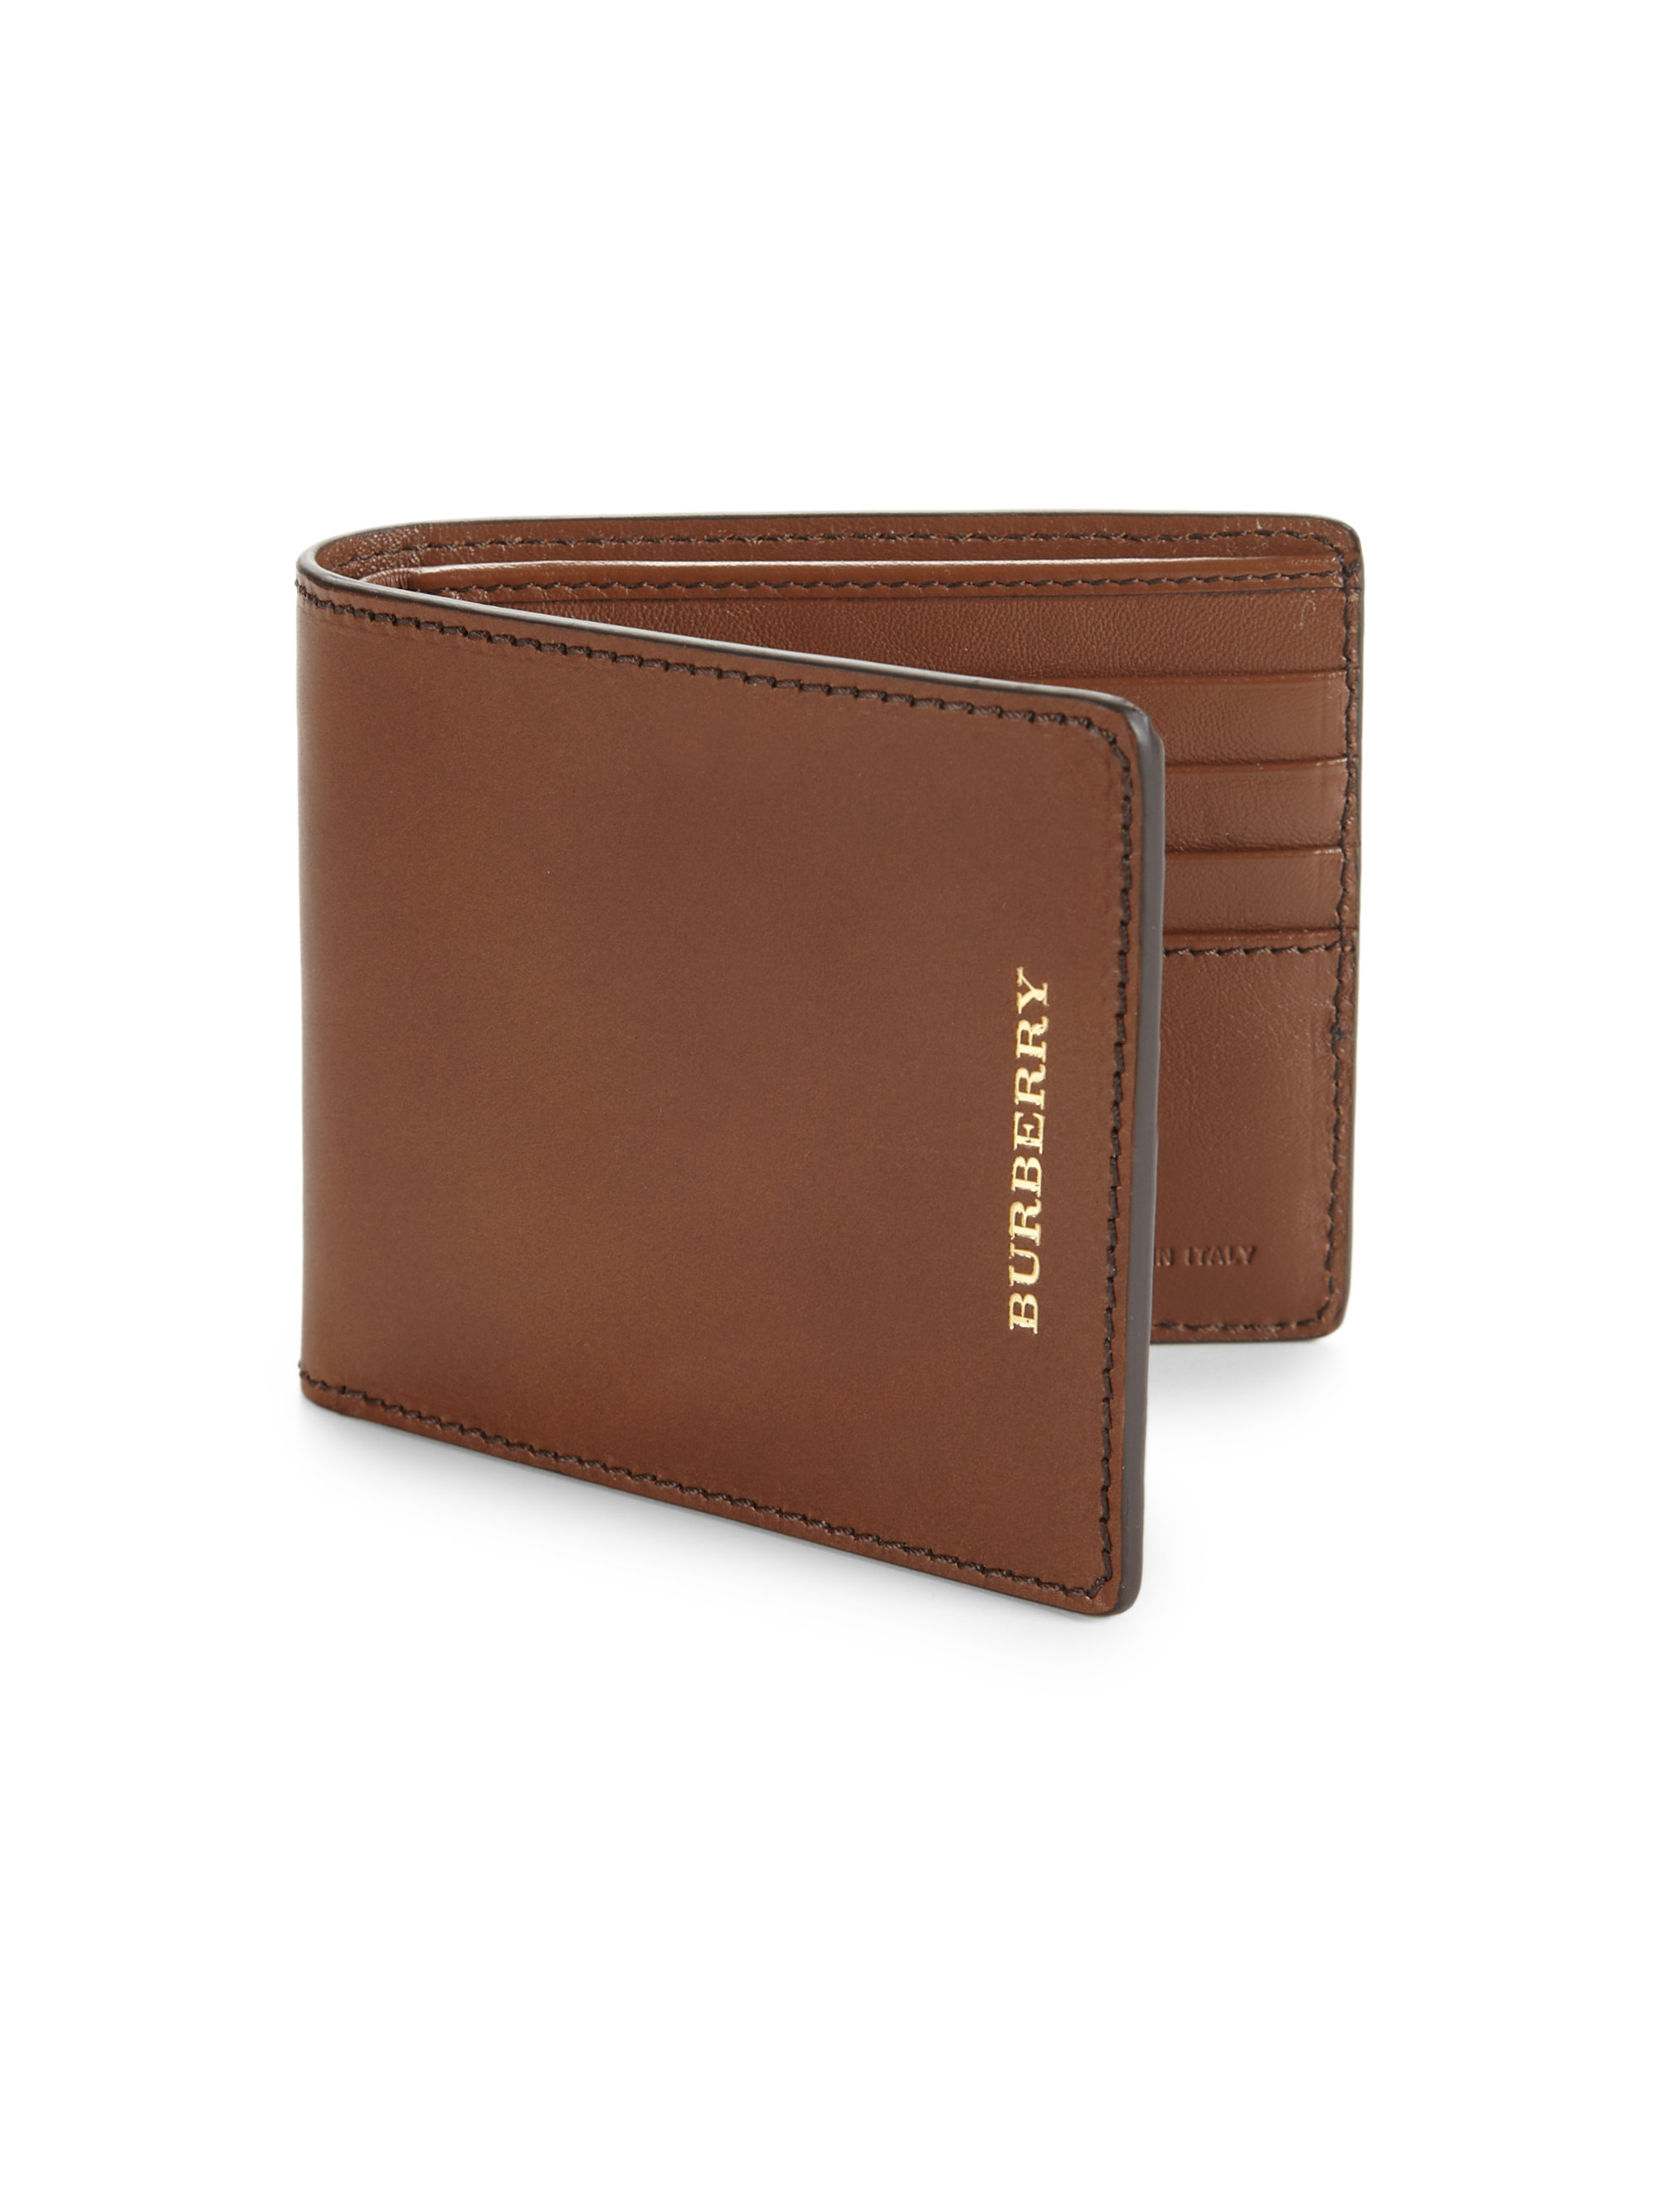 Burberry Leather Billfold Wallet in Brown for Men - Lyst